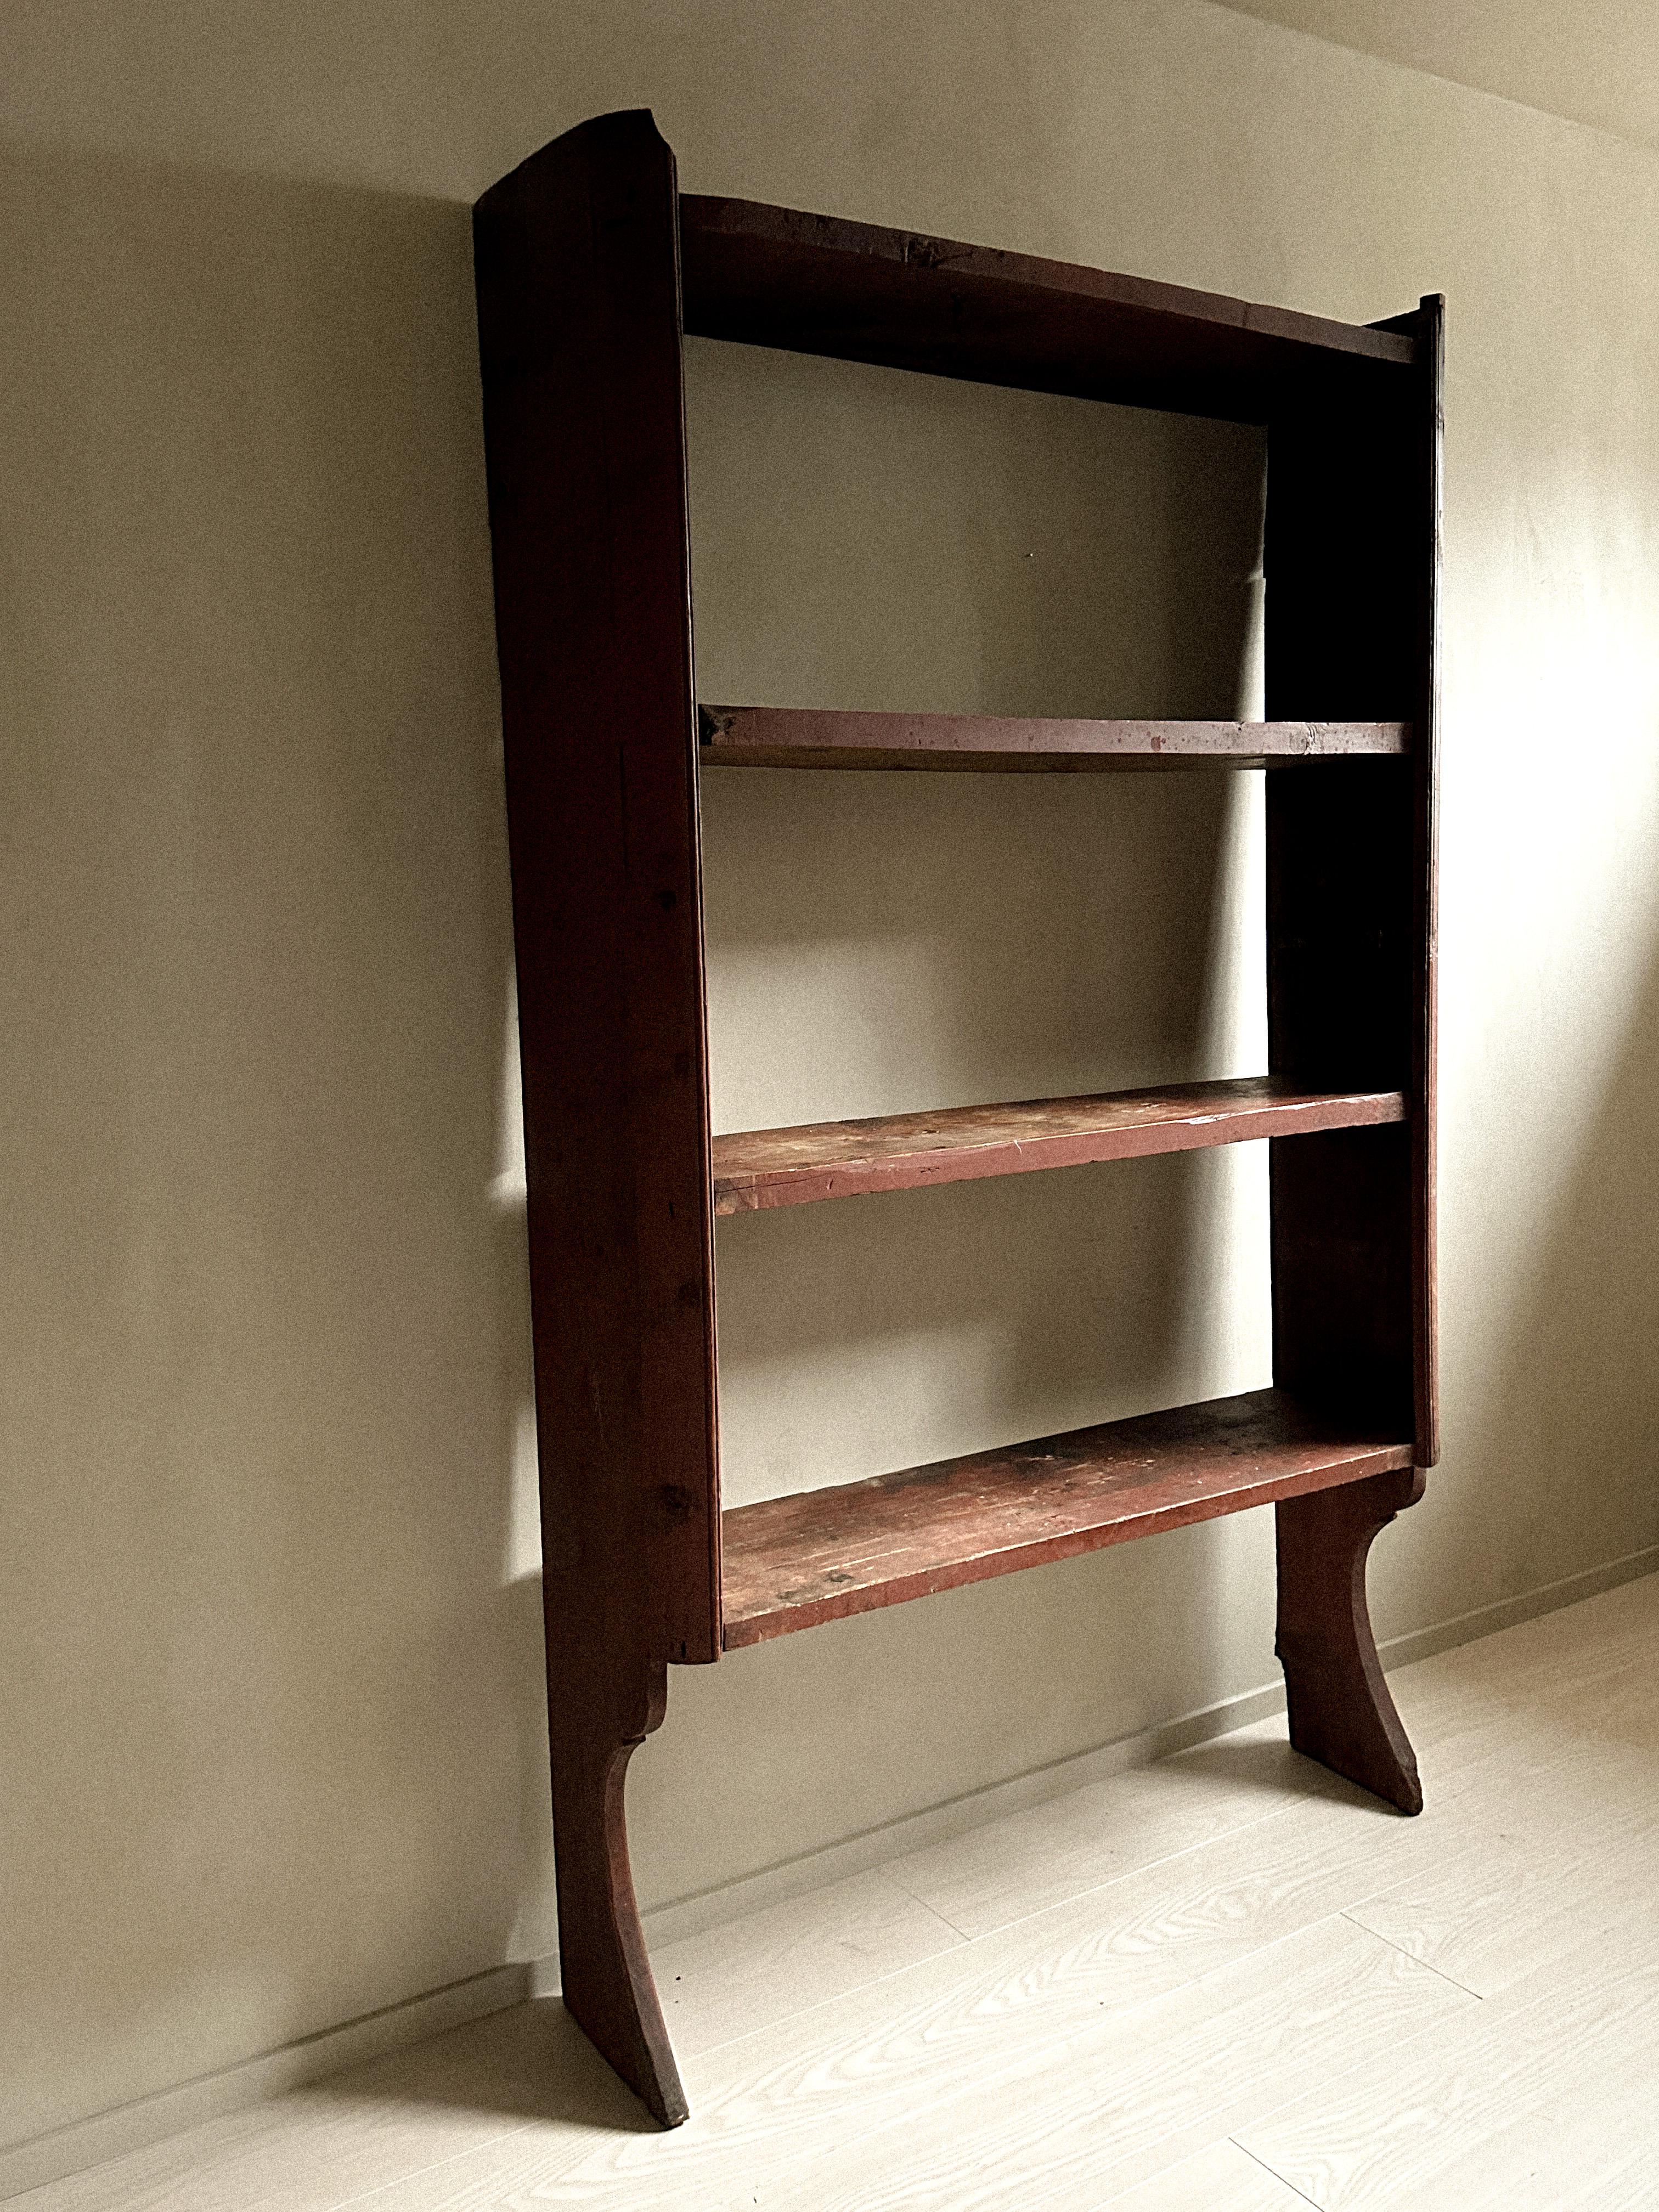 Beautiful antique book shelf in pine. Handcrafted by a Swedish cabinetmaker in the mid 1800s.

A great vintage book shelf with a lovely patina. Original deep red paint. Should be attached to a wall to ensure stability. 

A unique rustic piece that